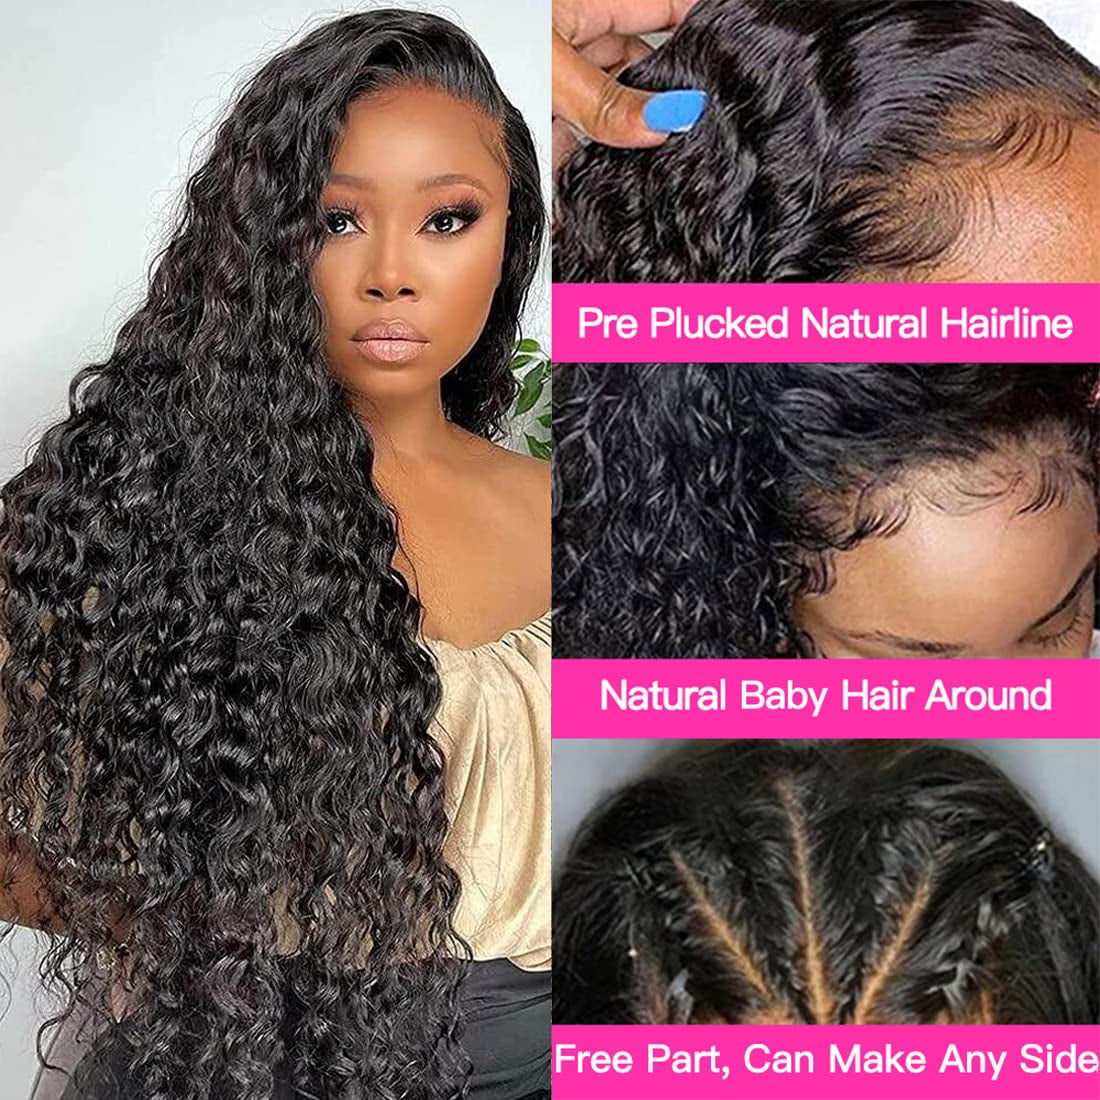 Lace Front Wigs Human Hair Water Wave Wigs for Black Women Human Hair 13X4 Lace Front Wigs Glueless Wigs Pre Plucked with Baby Hair HD Transparent Lace Frontal Wigs Wet and Wavy Brazilian Virgin Wigs Curly Lace Front Wig Natural Color 180% Density 28 Inch